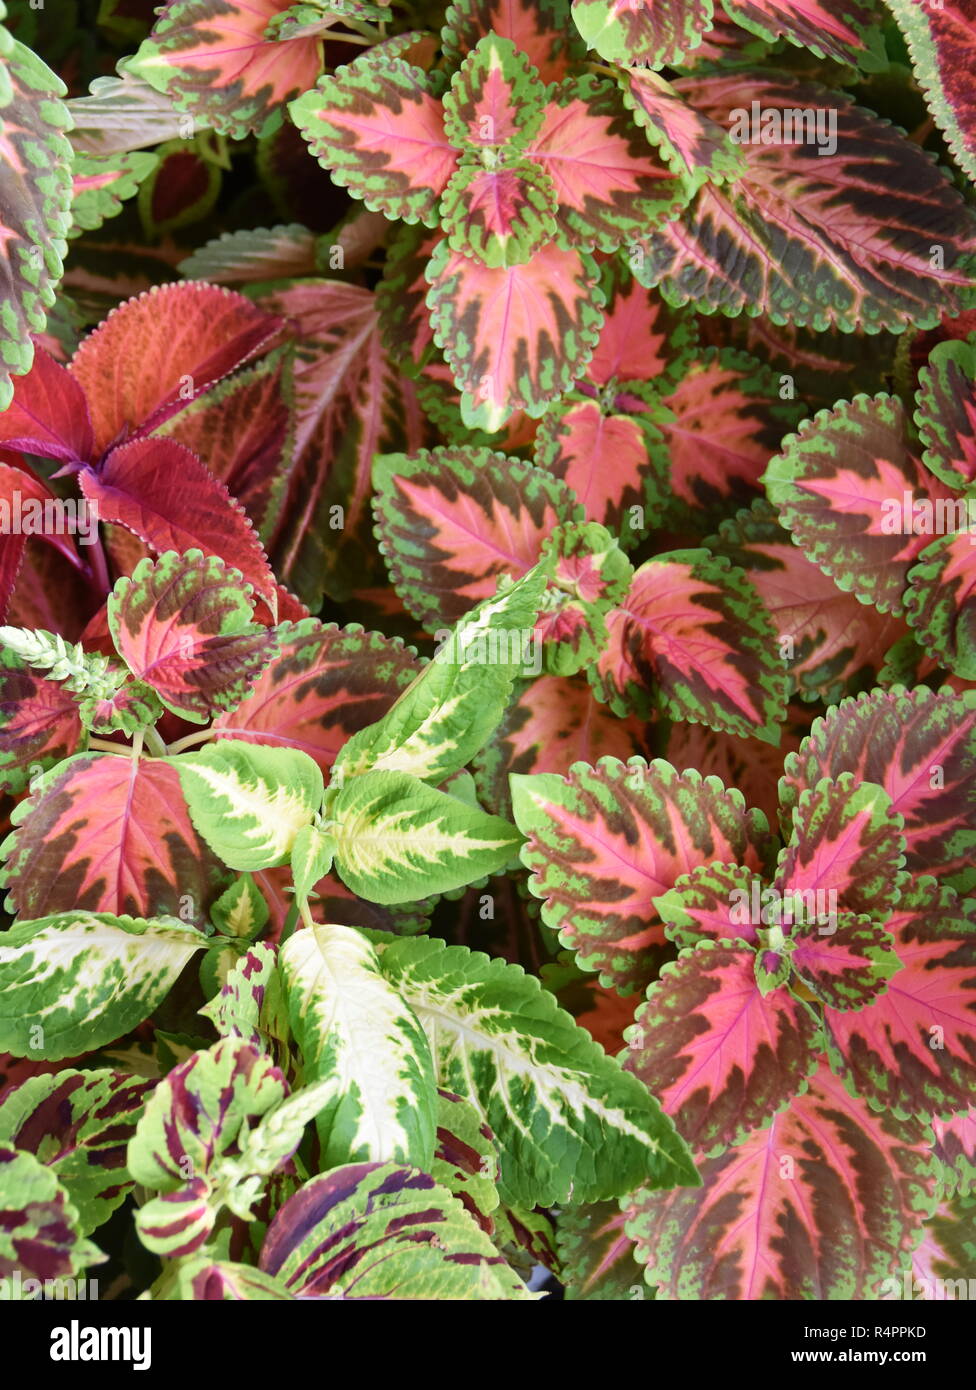 Closeup on the multicolored leaves  from different Coleus painted nettle plants growing together Stock Photo